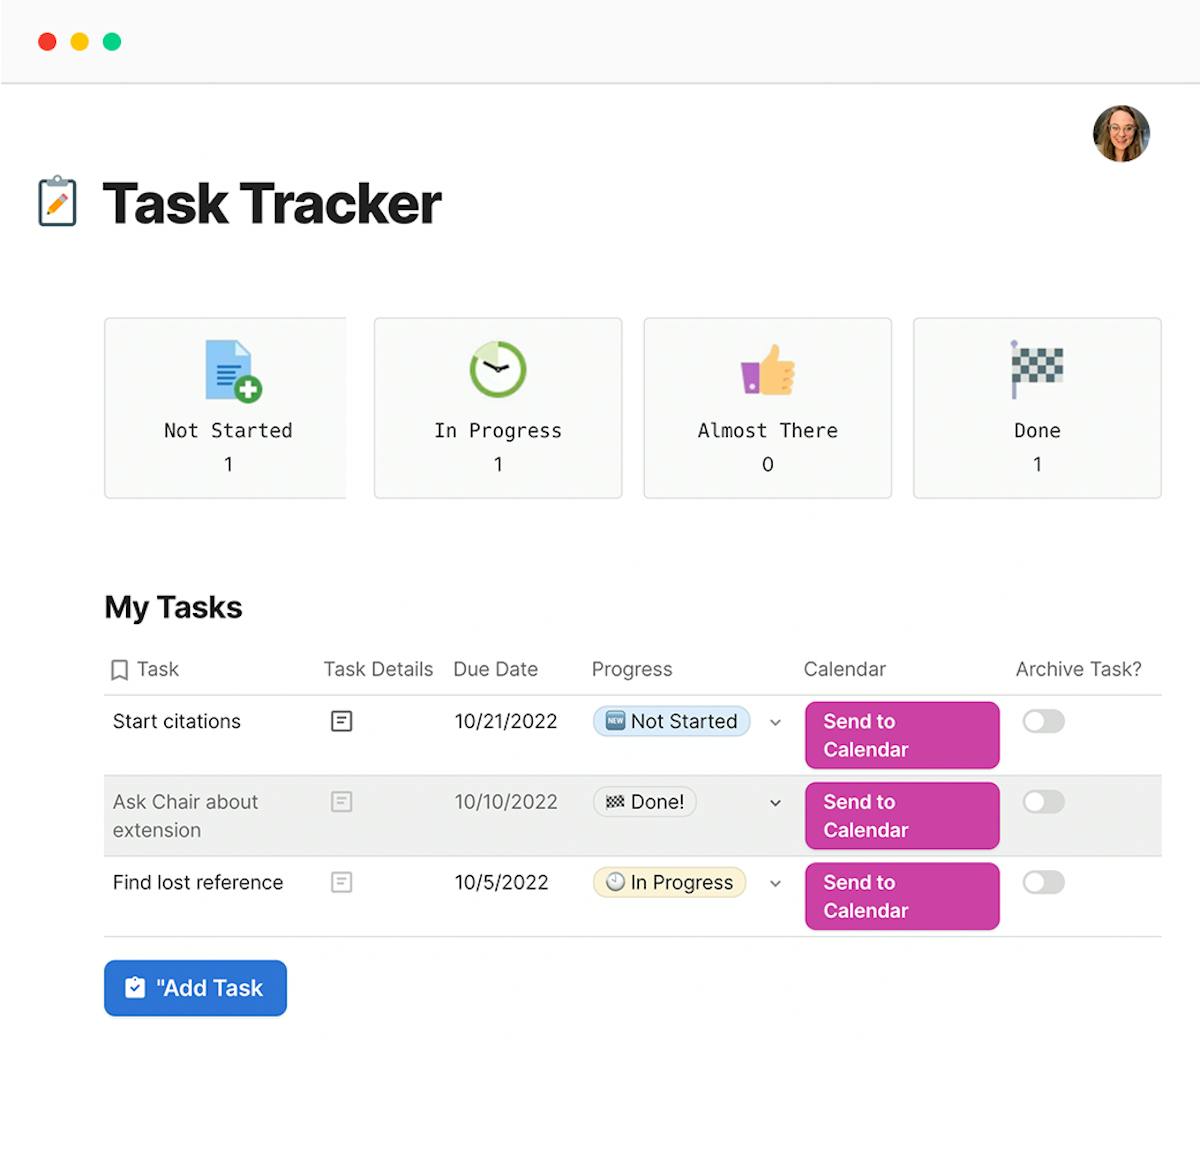 Task tracker built in Coda - shows the task, its details, and progress.